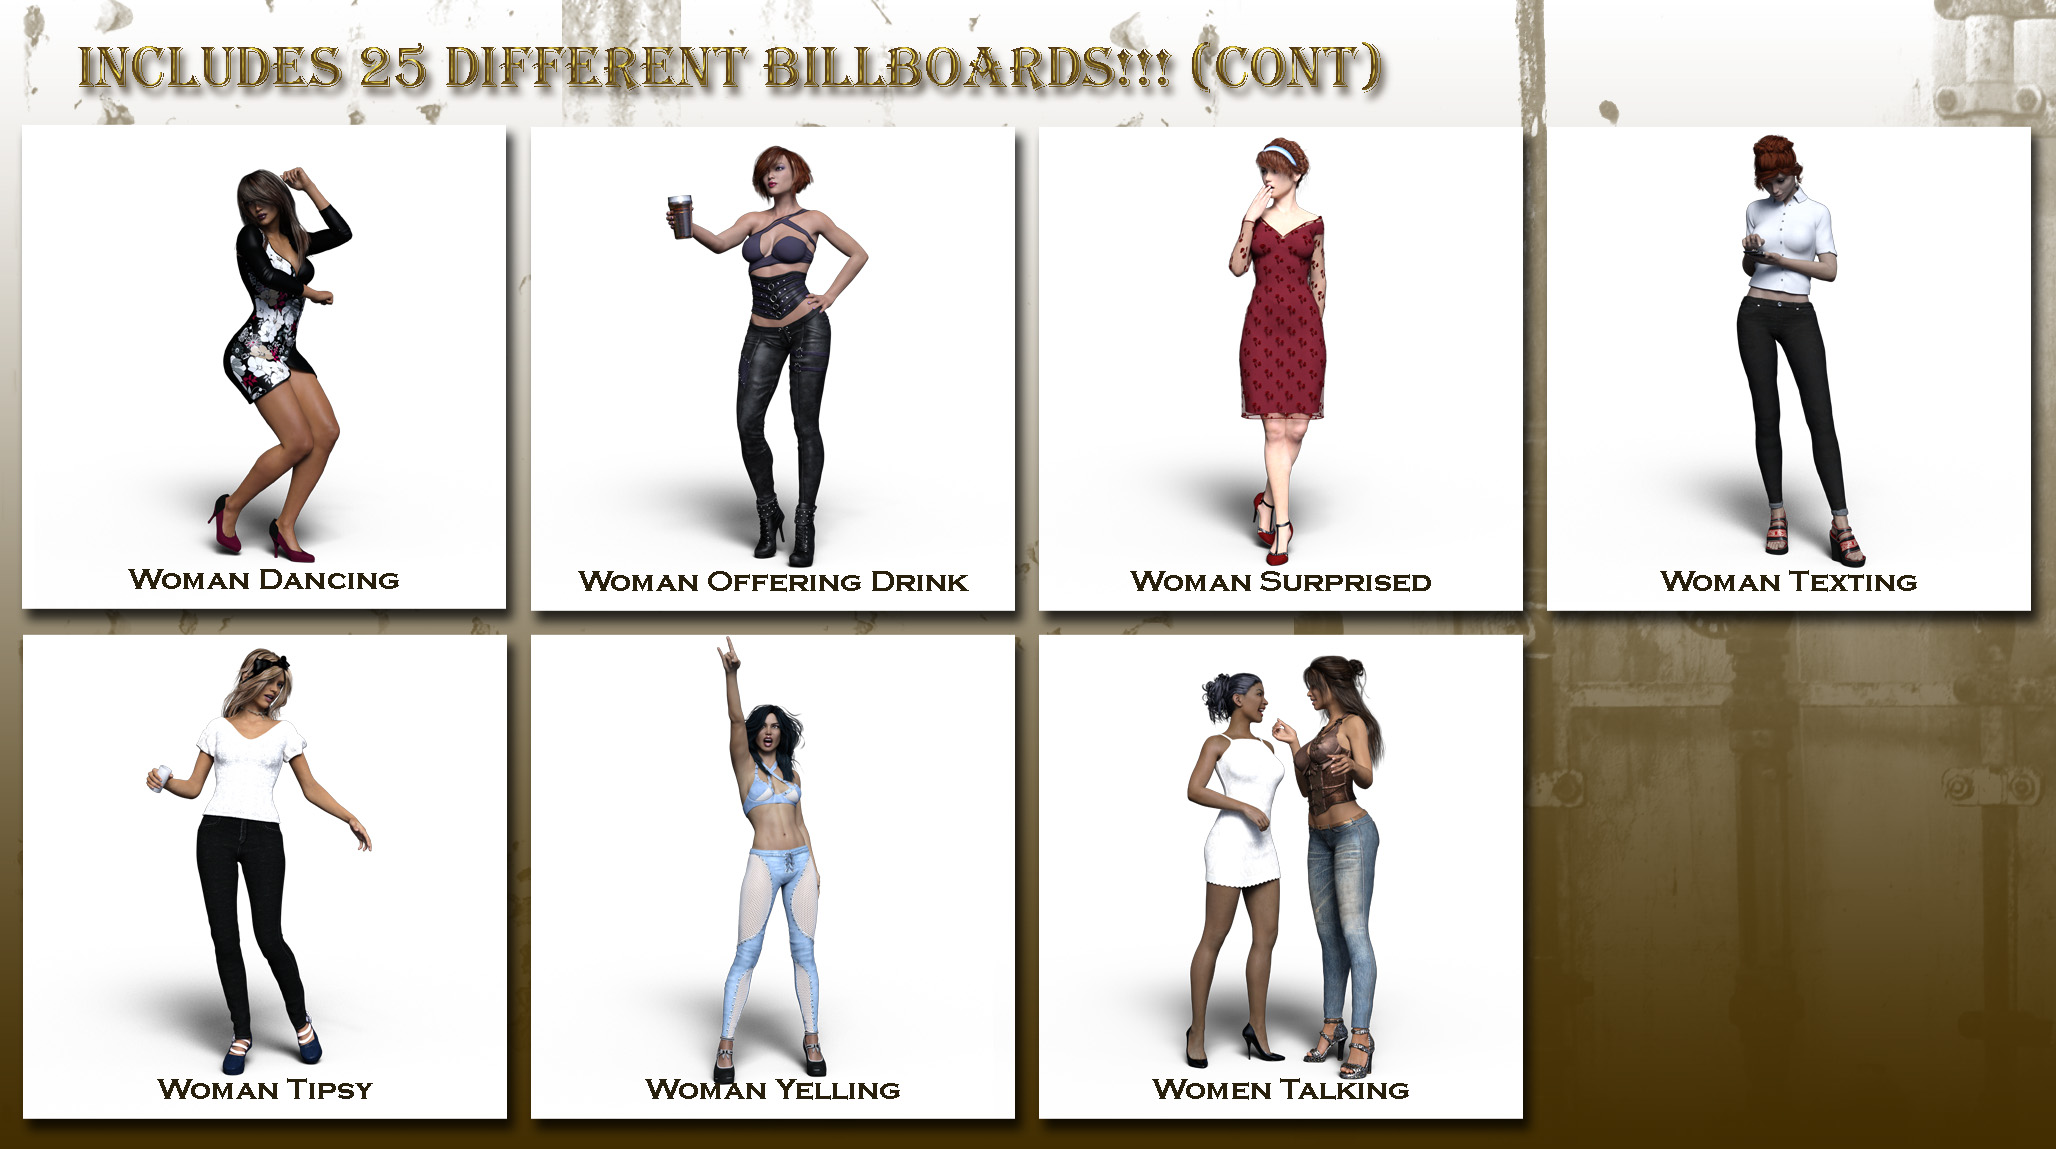 Now-Crowd Billboards - Party Time by: RiverSoft Art, 3D Models by Daz 3D